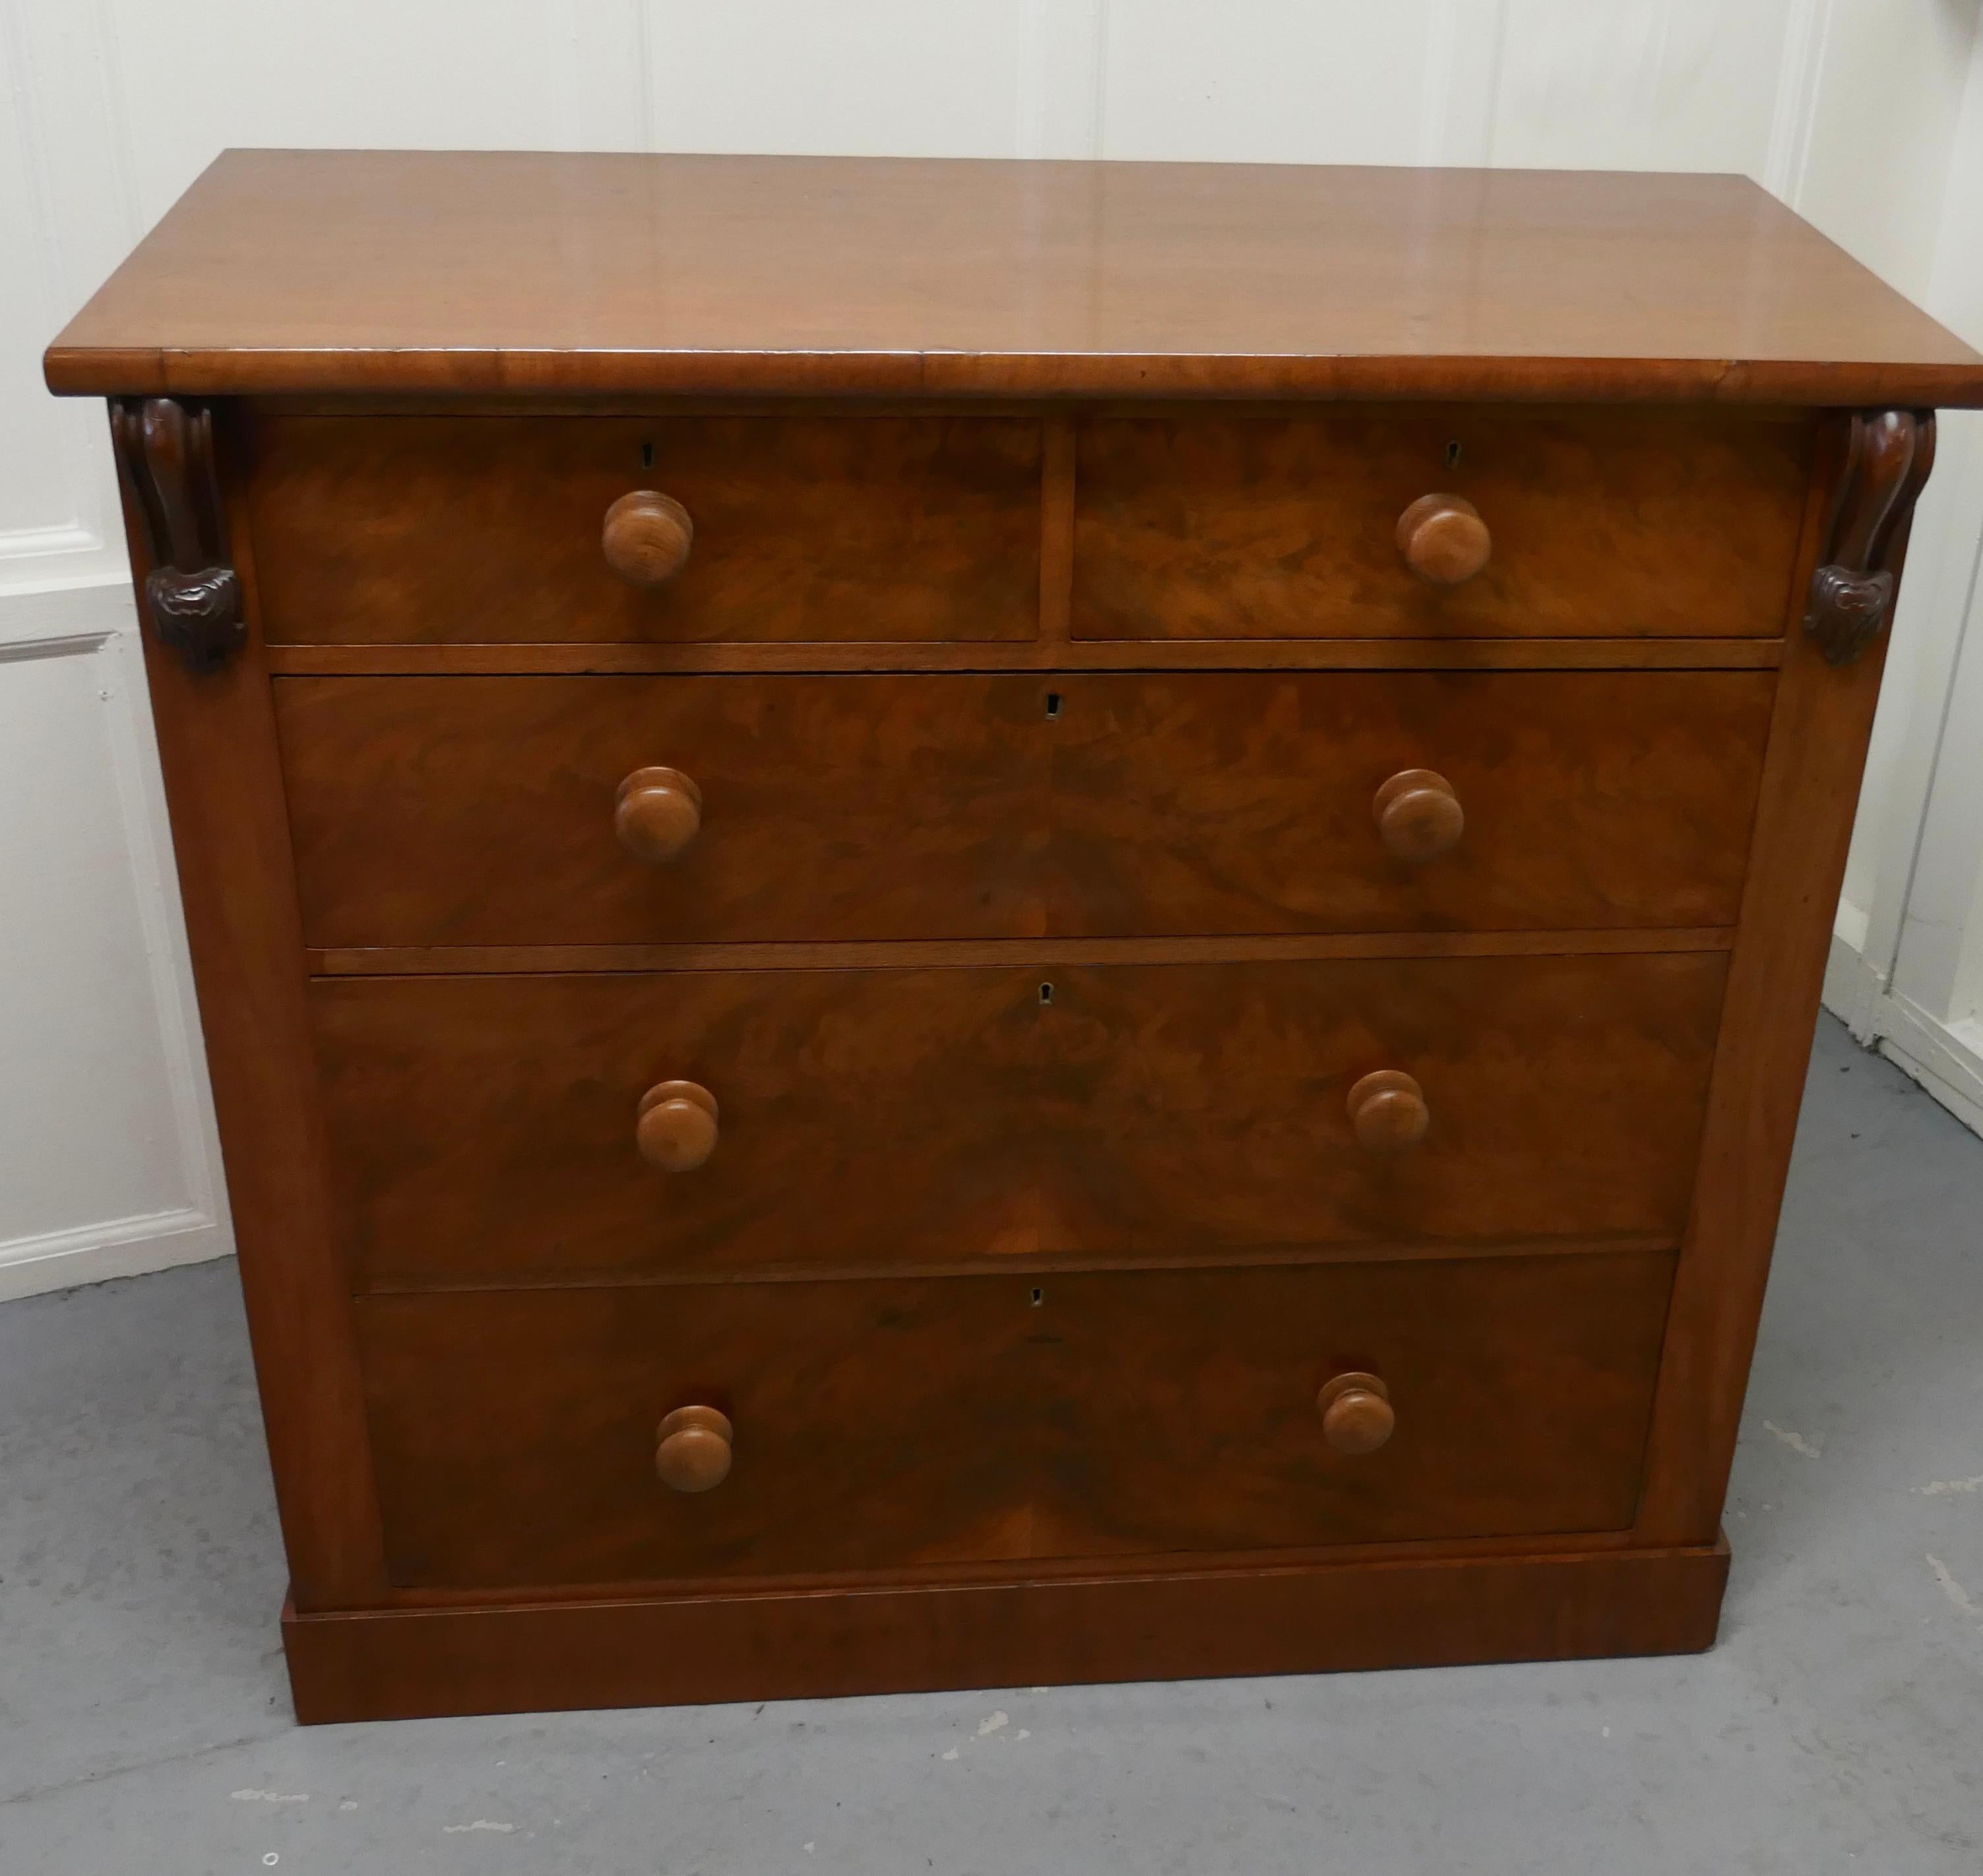 Large Victorian Chest of Drawers 

Victorian Figured Walnut chest of drawers, the chest has 2 carved corbels on the front, it has 2 short over 3 graduated drawers with turned wooden knobs

The chest is in very good condition, it has a good colour